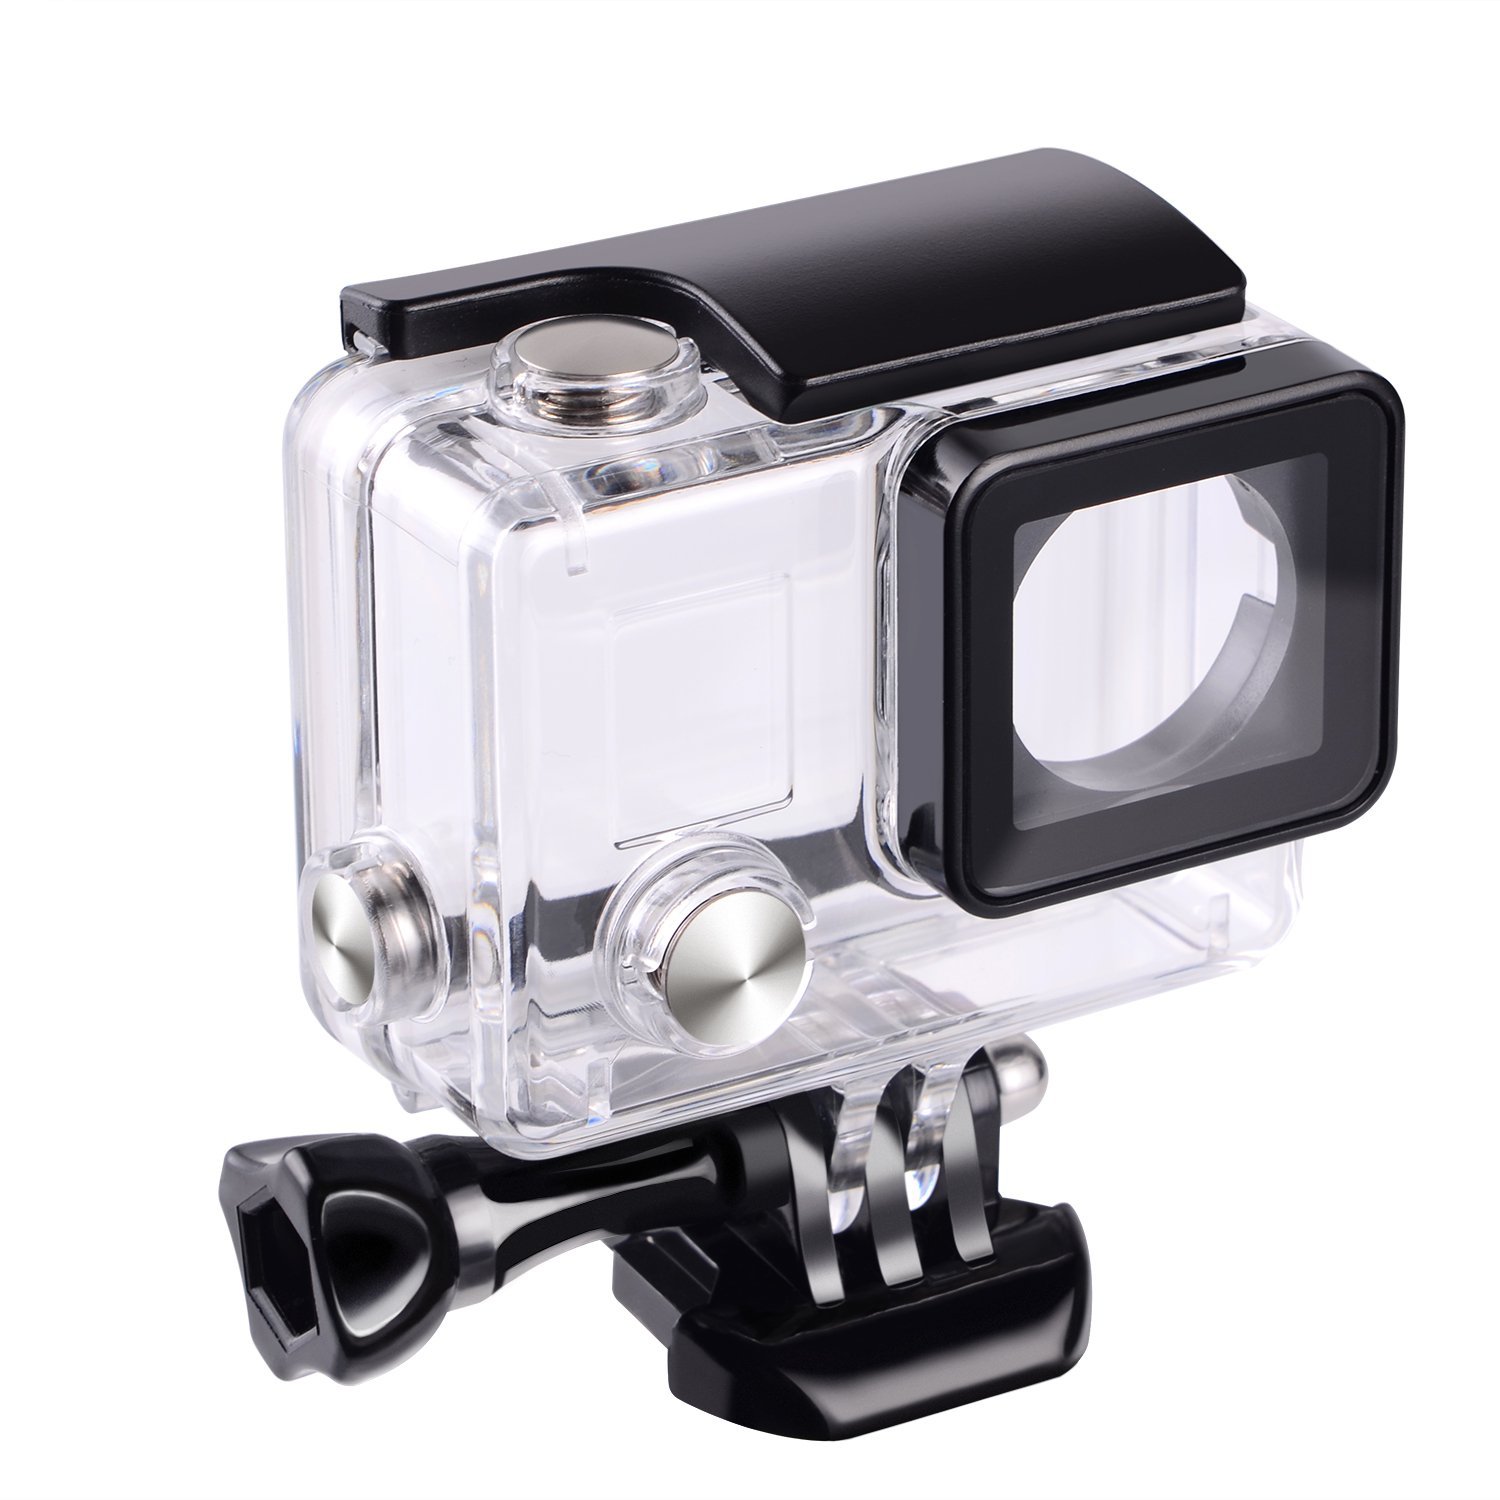 Book Cover Suptig Replacement Waterproof Case Protective Housing for GoPro Hero 4, Hero 3+, Hero3 Outside Sport Camera for Underwater Use - Water Resistant up to 147ft (45m)